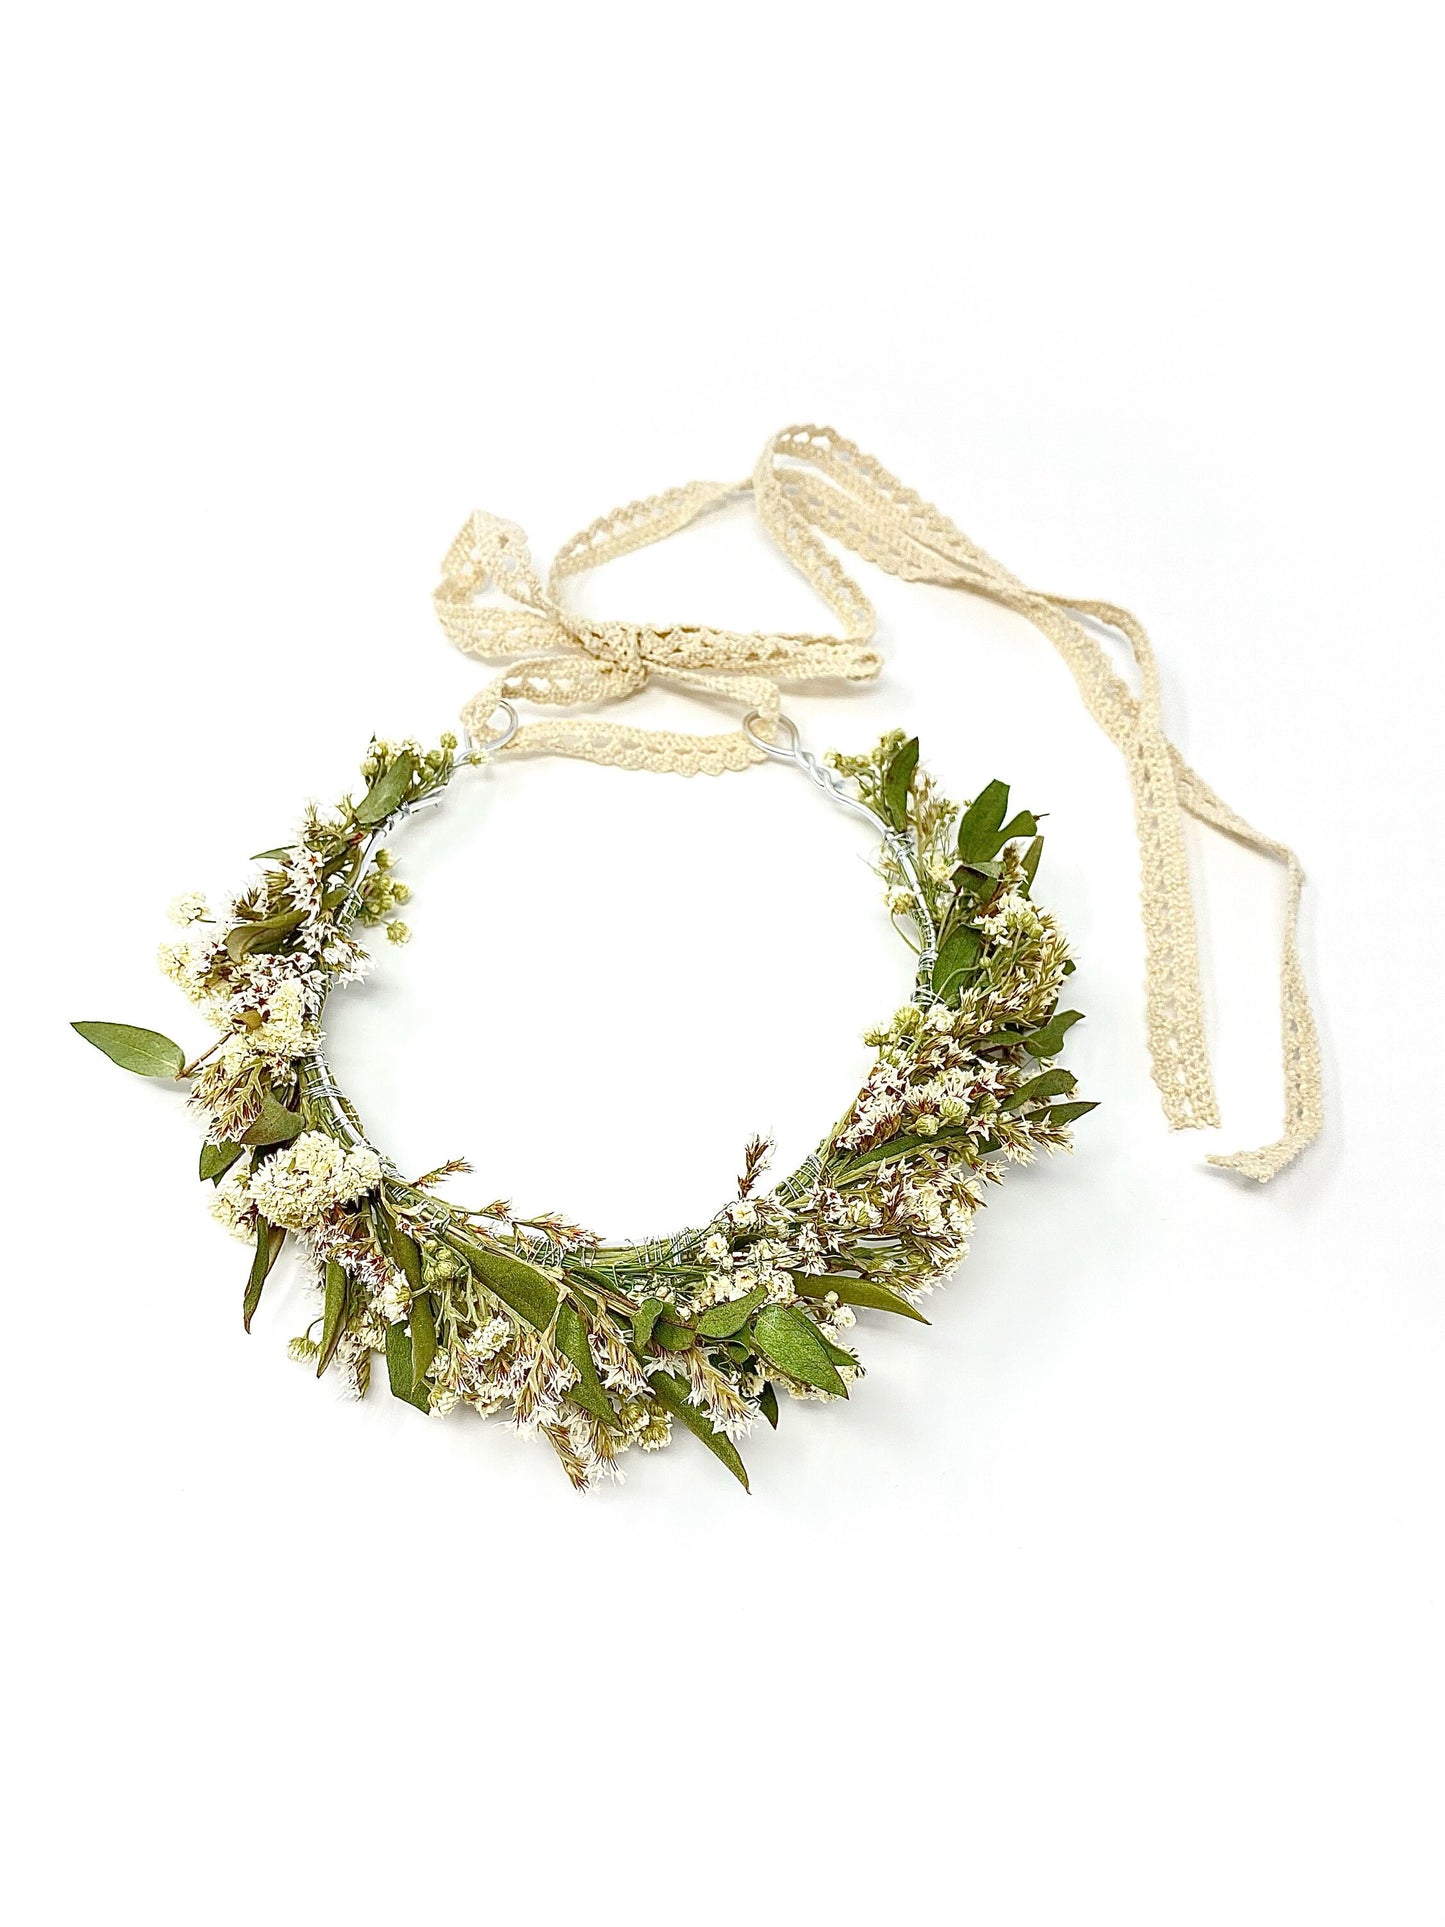 Wedding Head Wreath, Dried Flowers, Preserved Floral, Hair Accessories, Bridal, Greenery, Green and White Crown, German Statice, Photoshoot